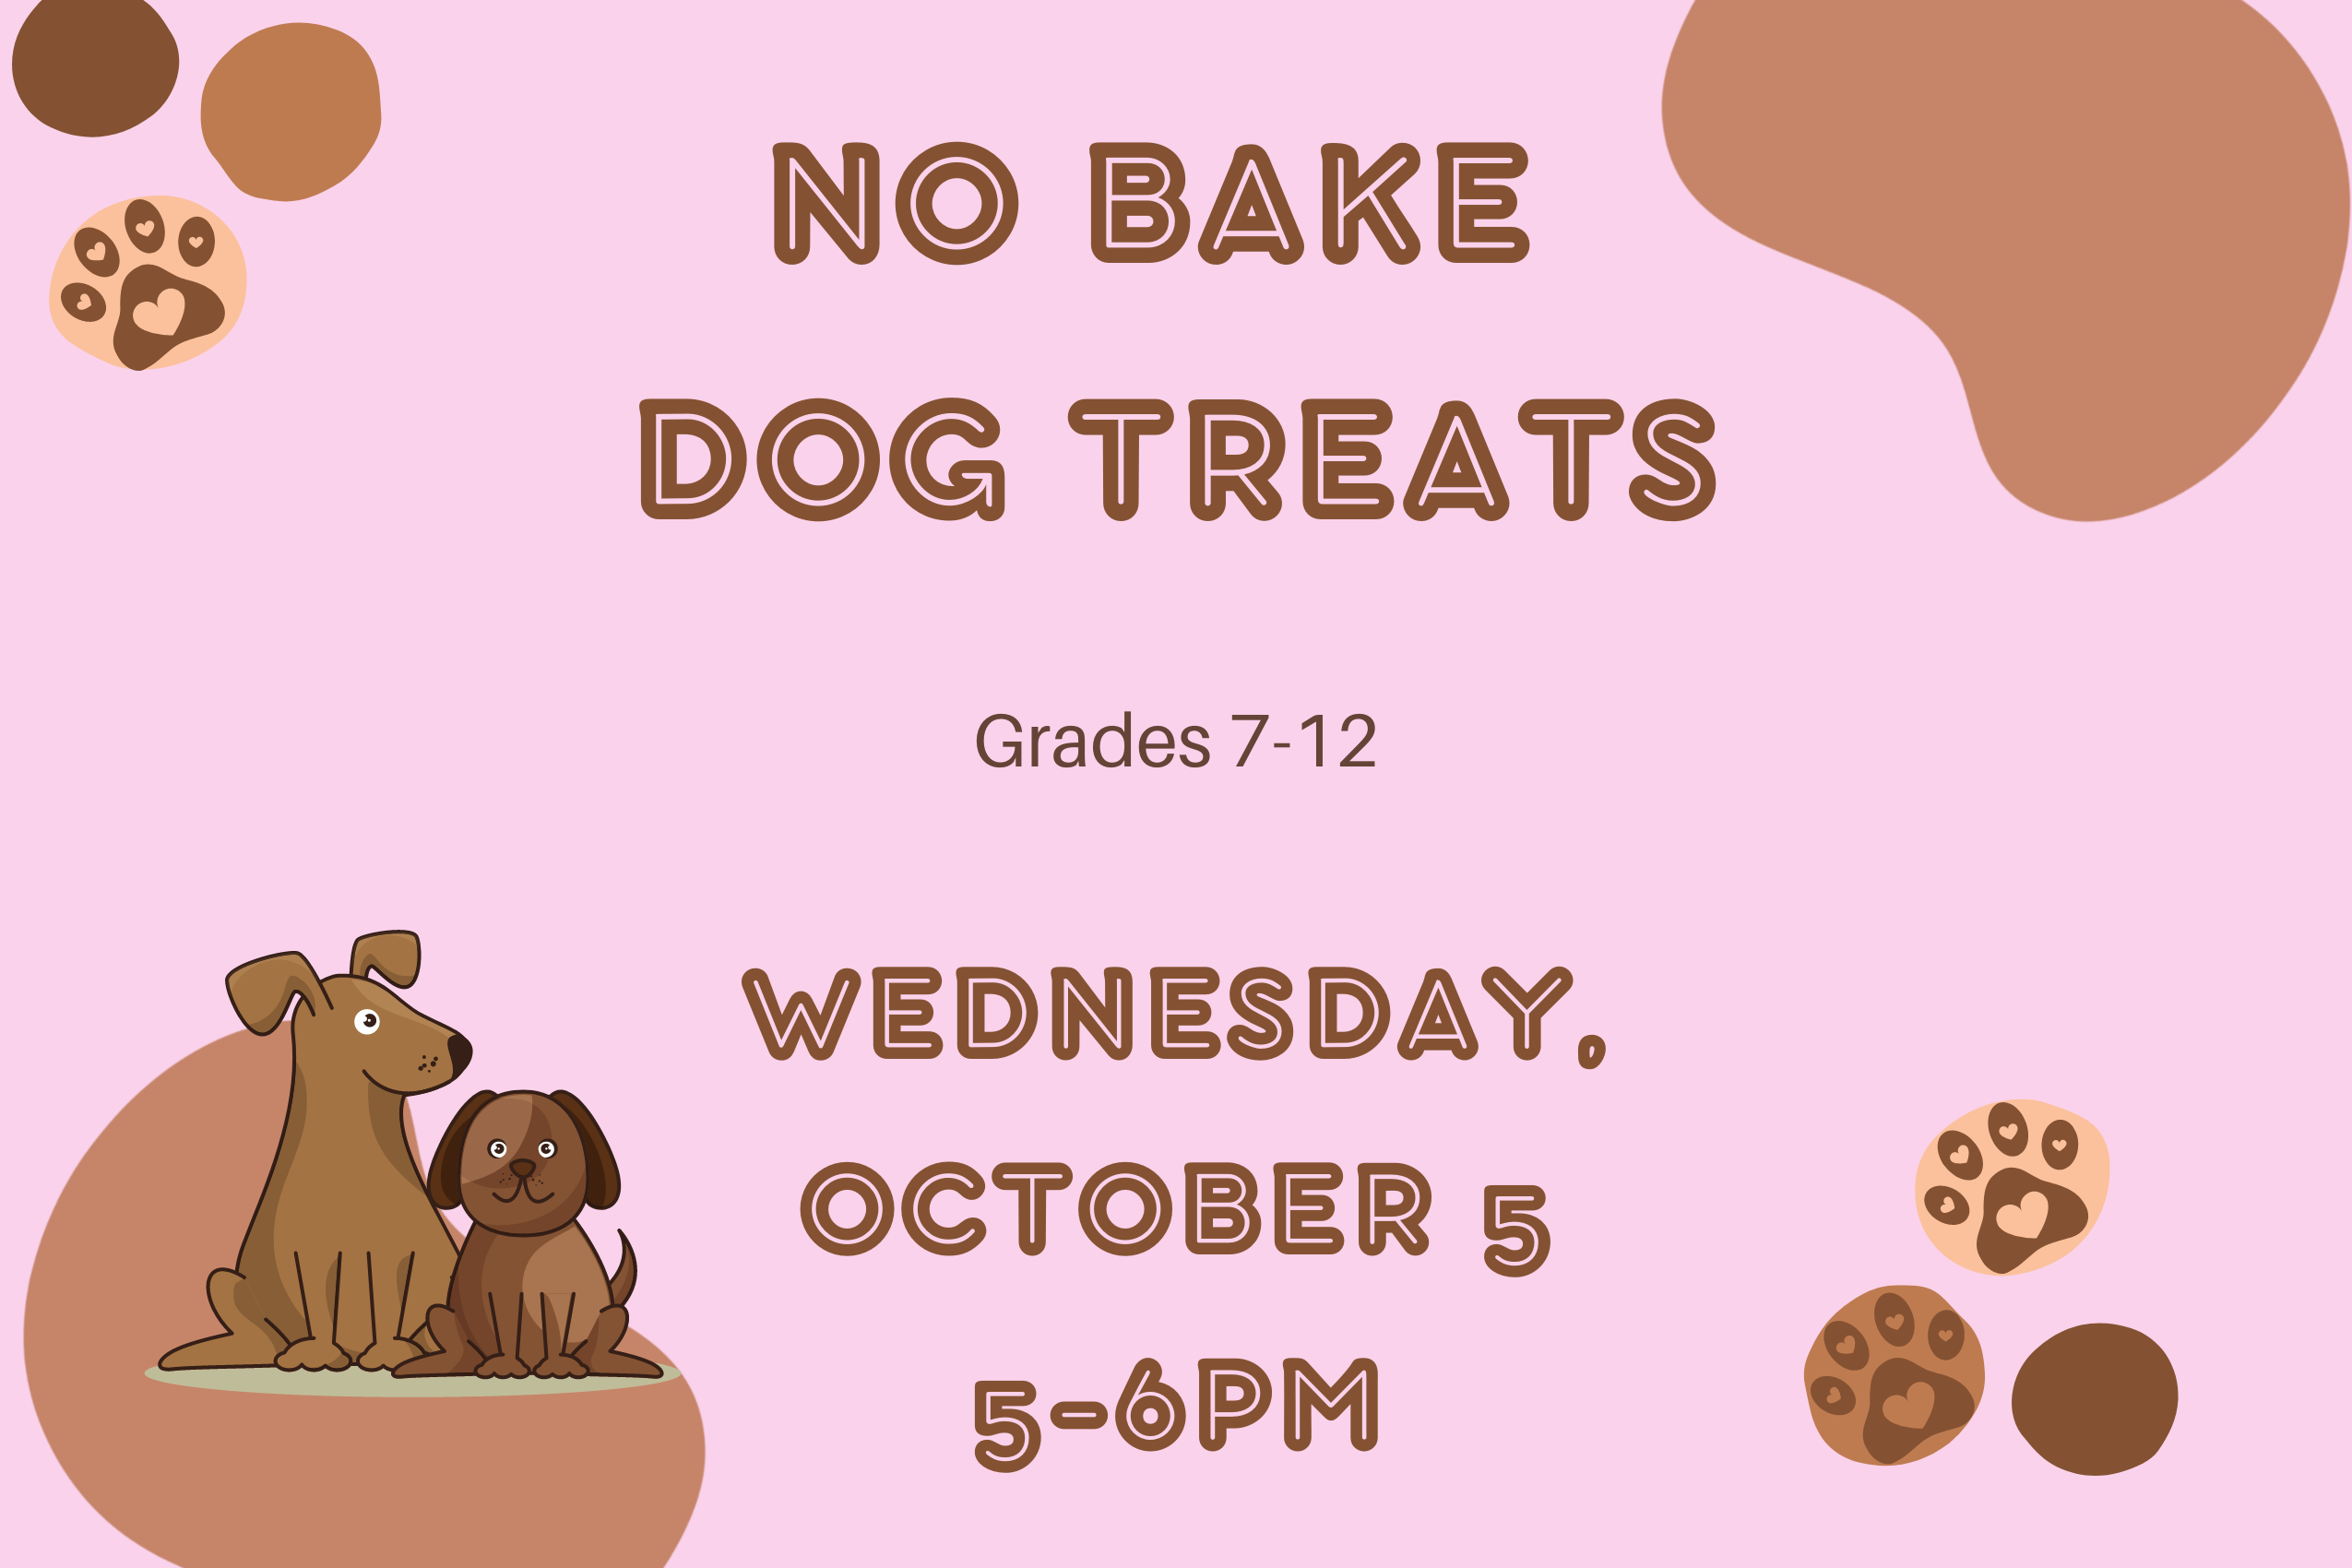 Program flyer with the following text, "No Bake Dog Treats. Grades 7-12. Wednesday, October 5. 5:00-6:00pm."